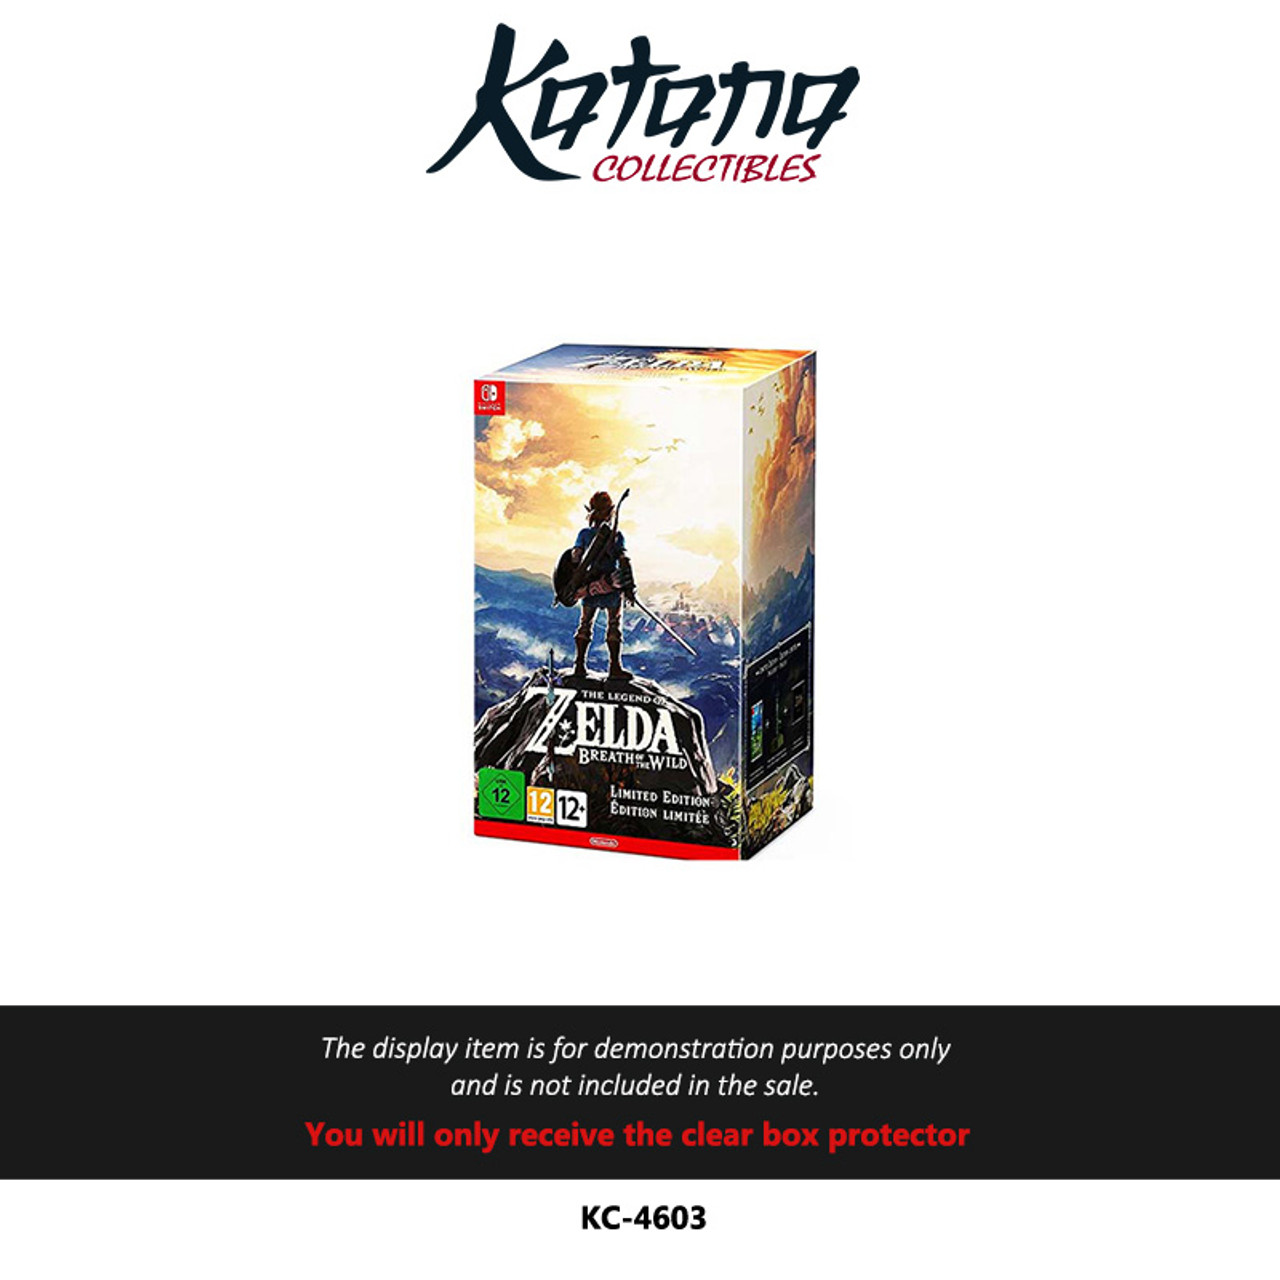 Katana Collectibles Protector For The Legend of Zelda: Breath of the Wild (Limited Edition) European Version